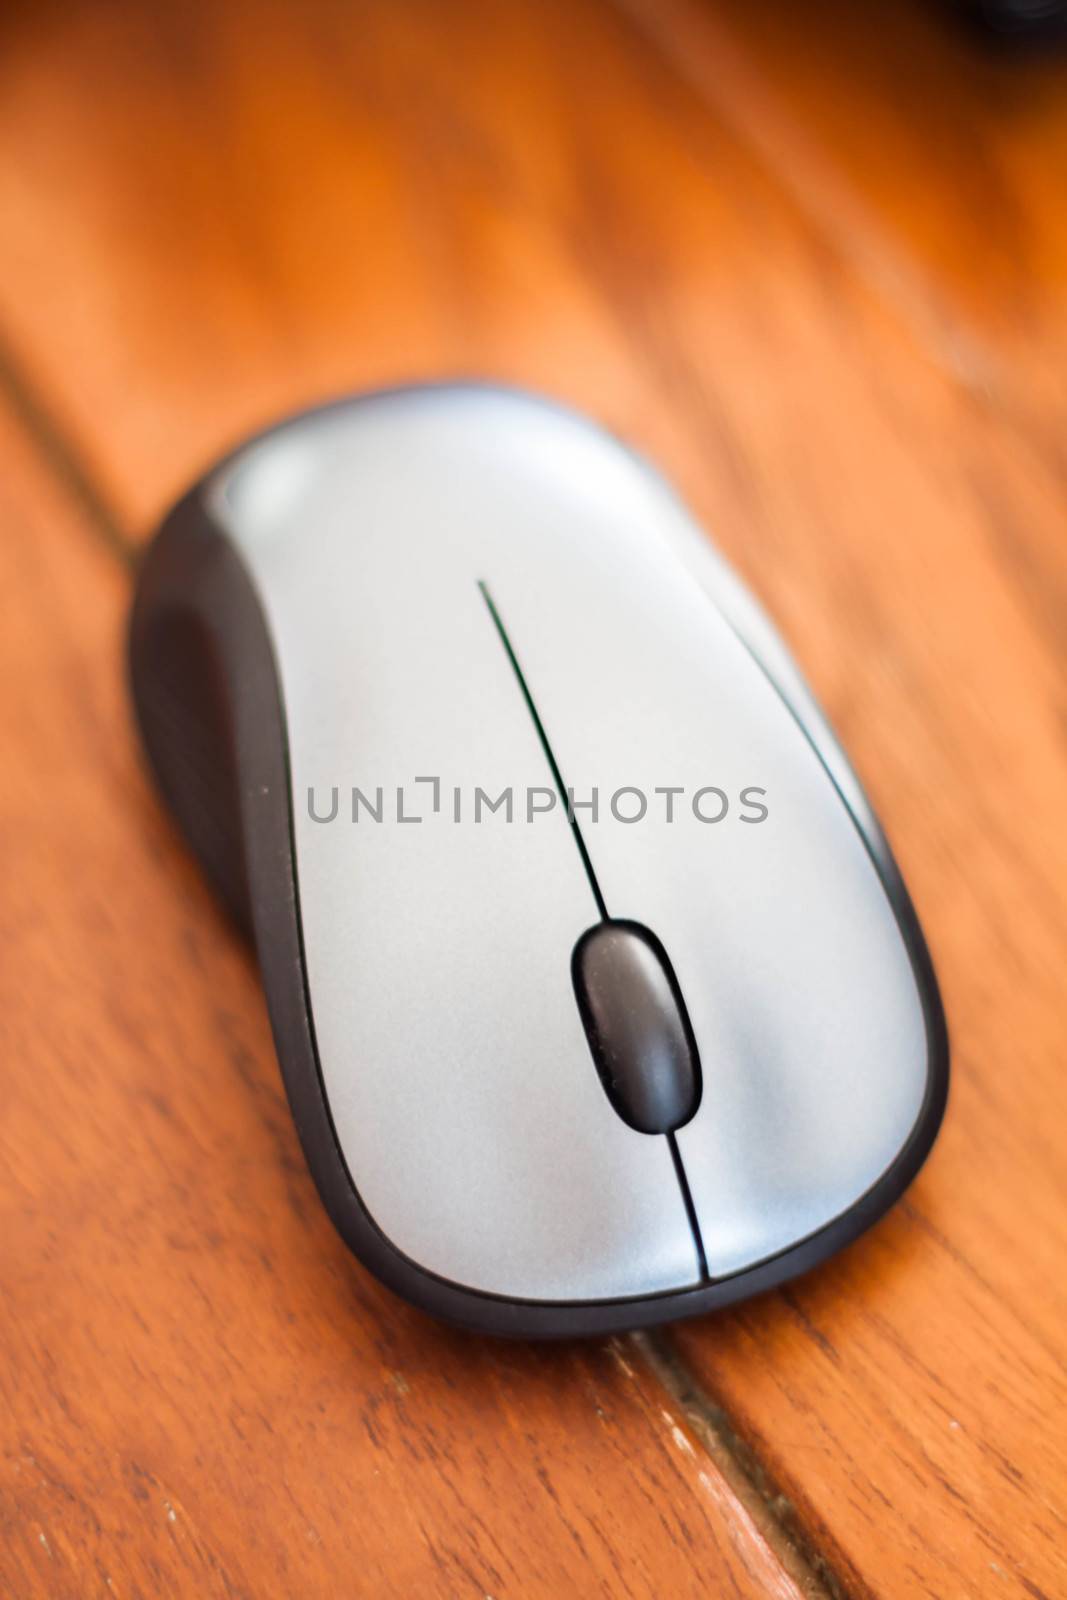 Silver wireless mouse on wood table